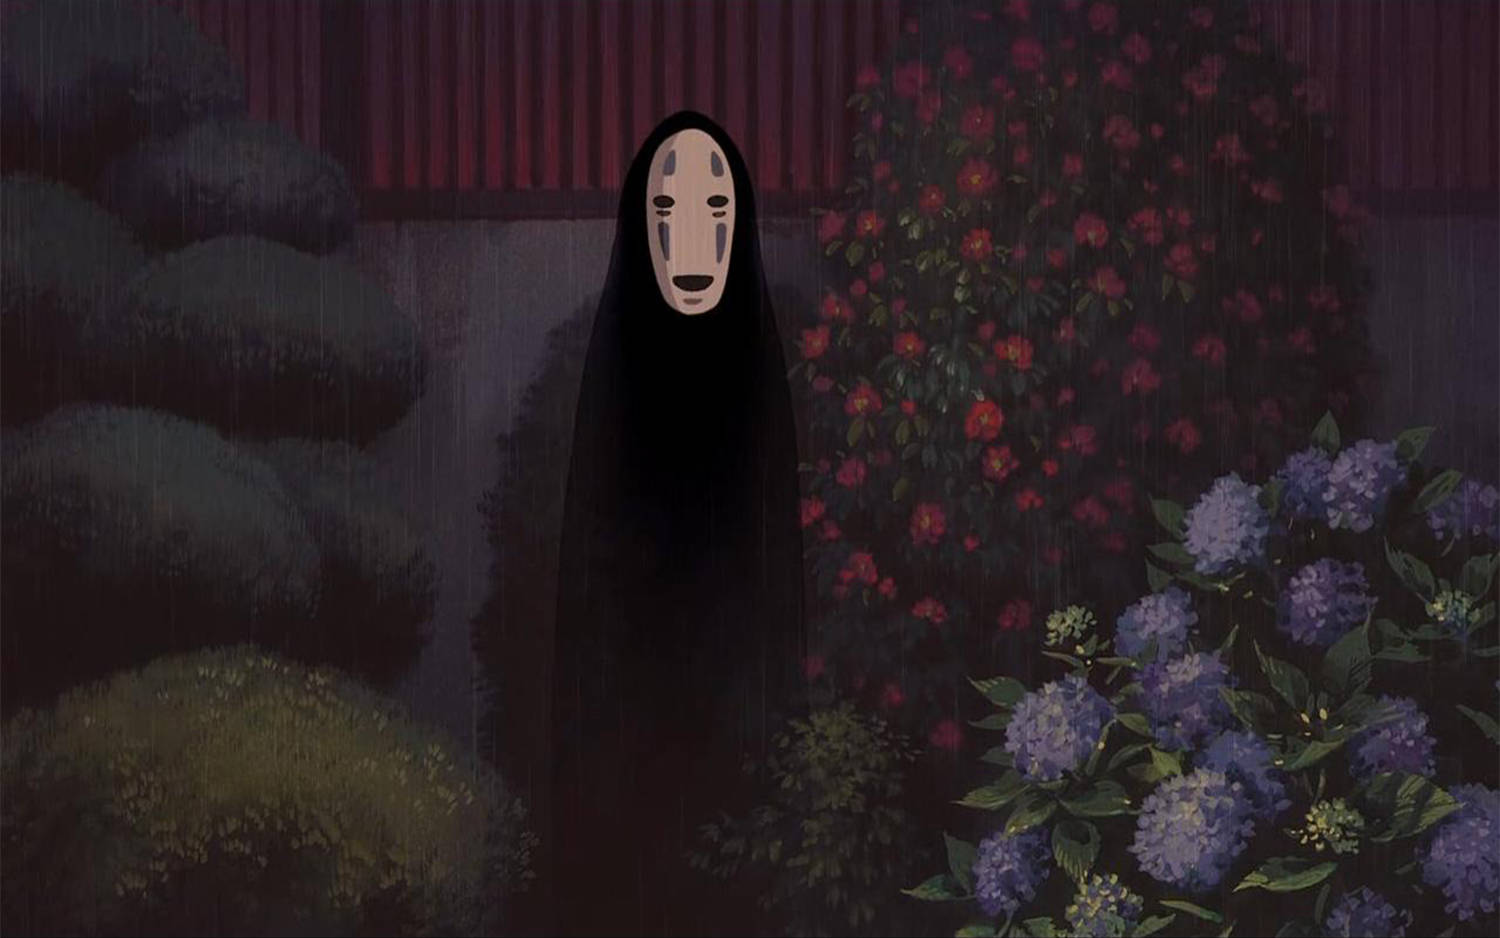 A picturesque garden with a prominent No-Face figure from the popular animated film, Spirited Away. Wallpaper